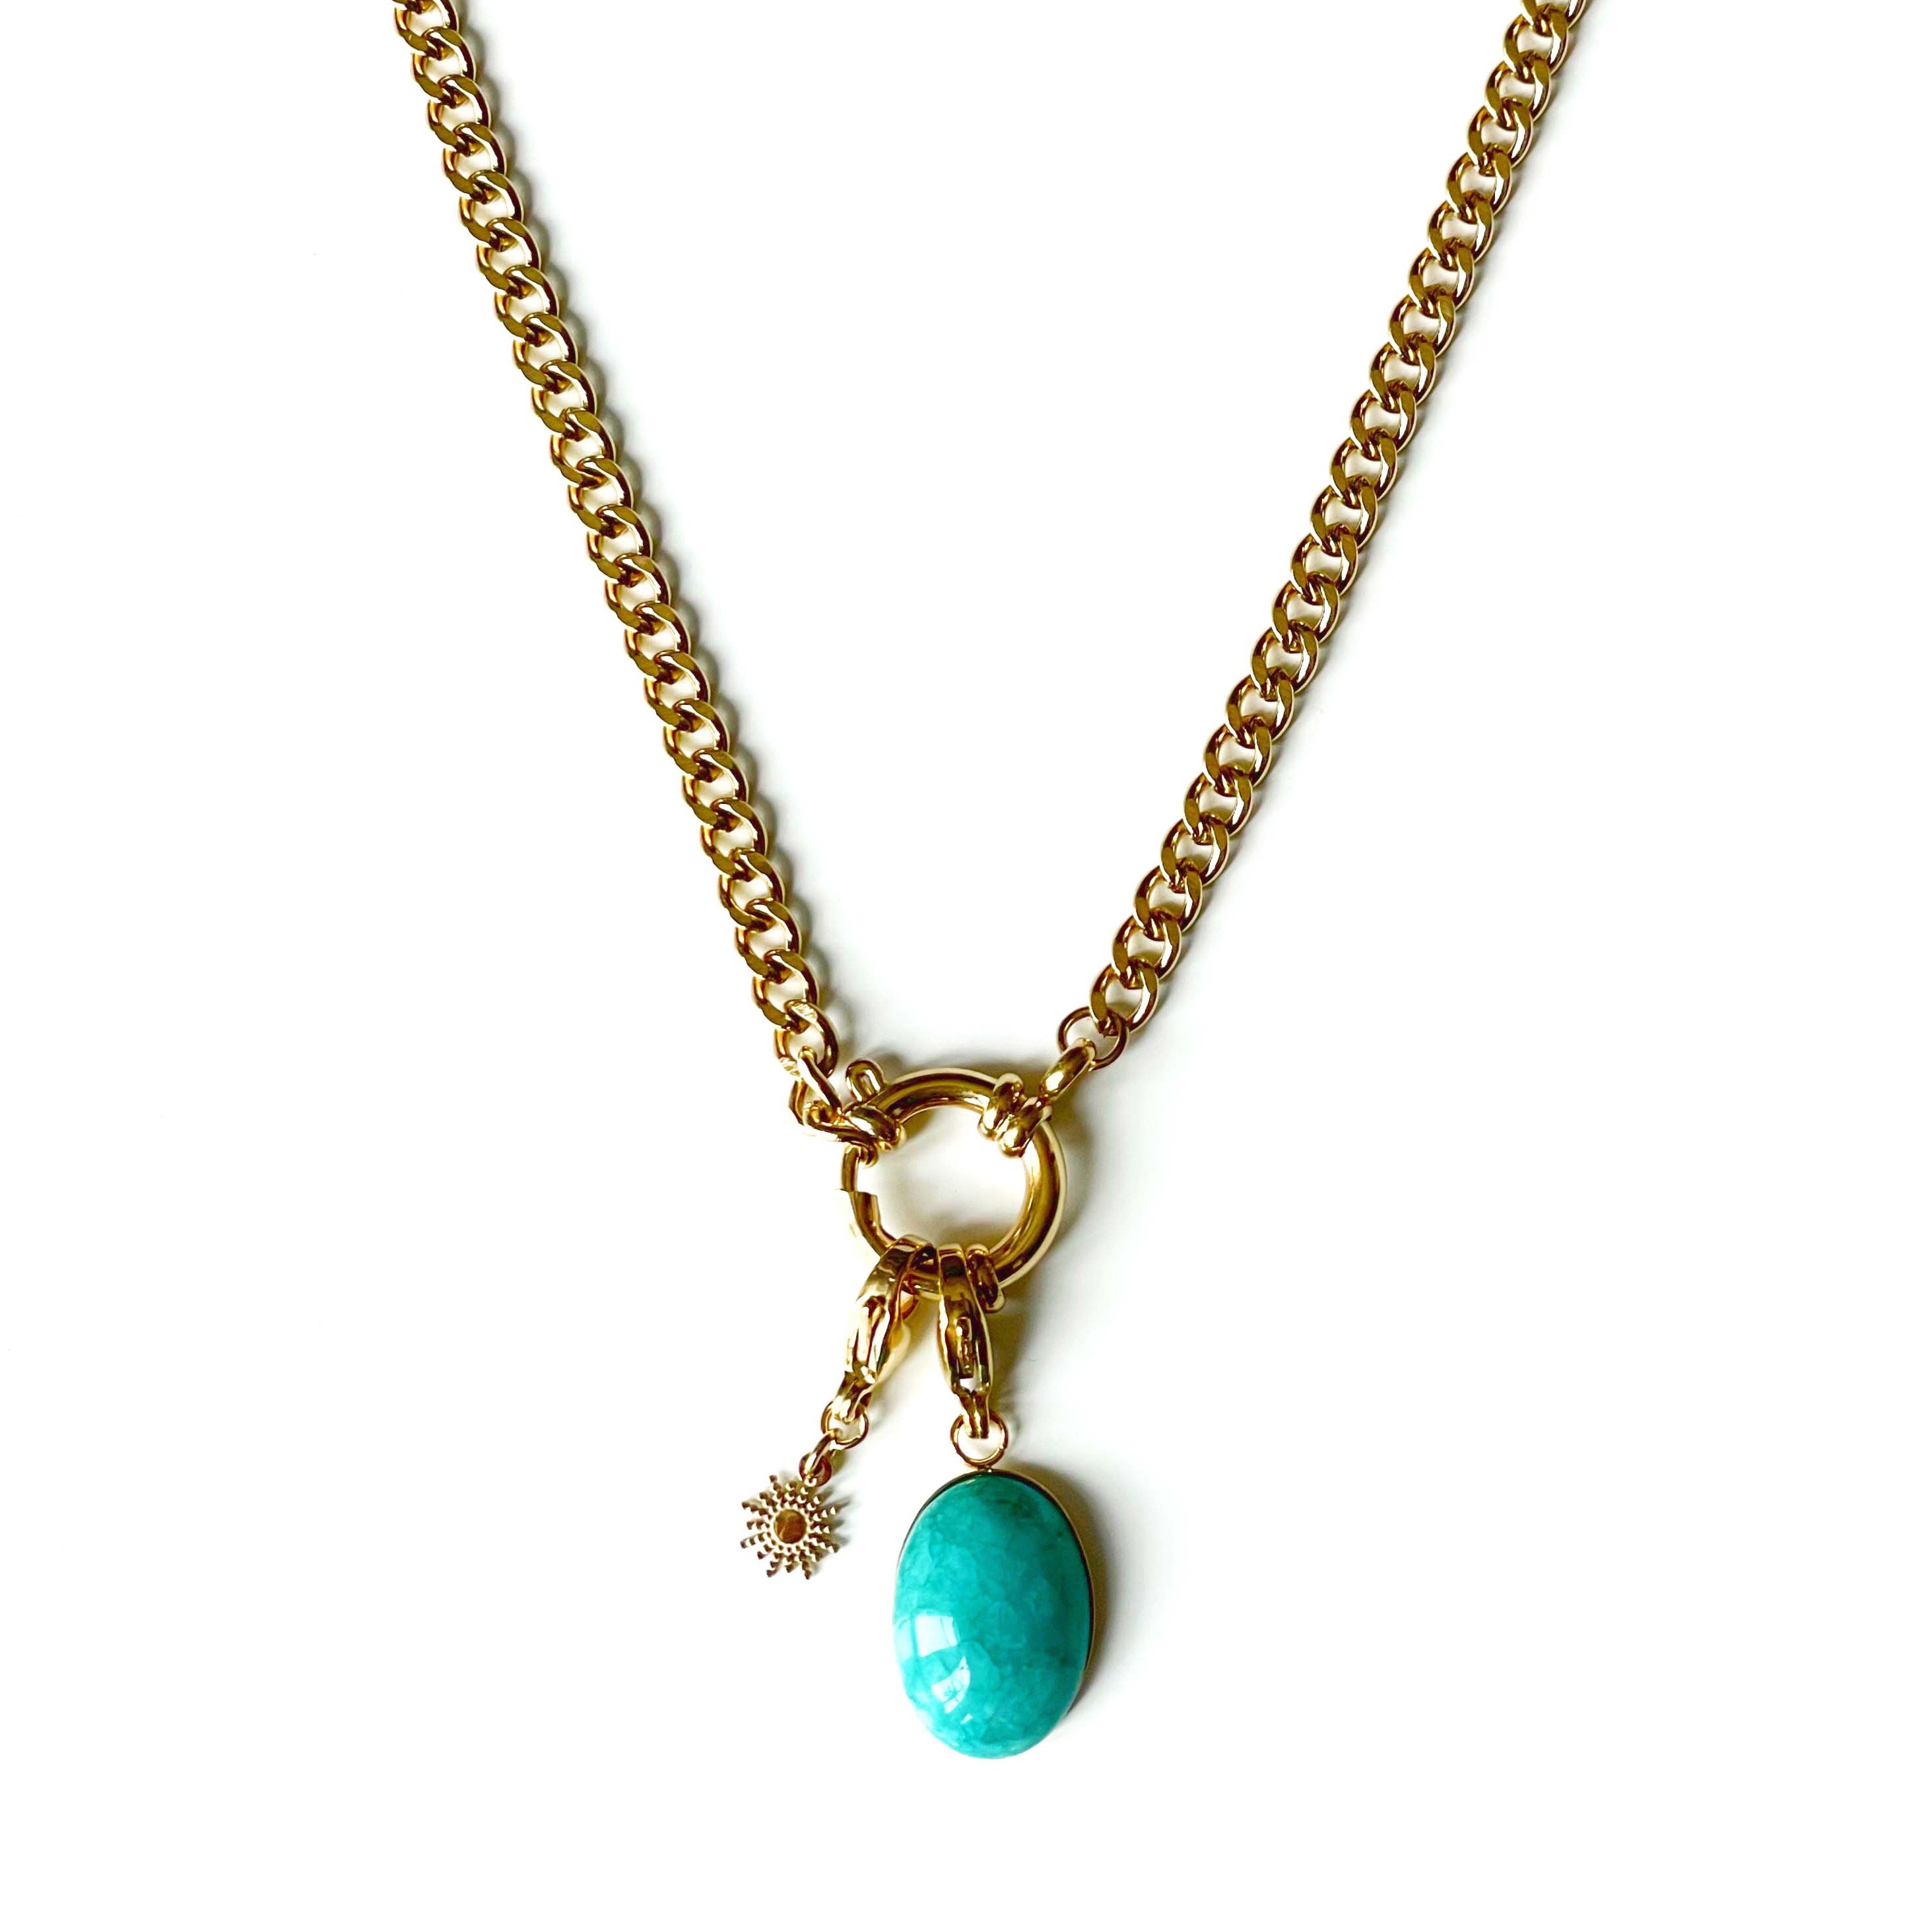 Stella Luxe 18k Gold Plated Turquoise Pendant Necklace